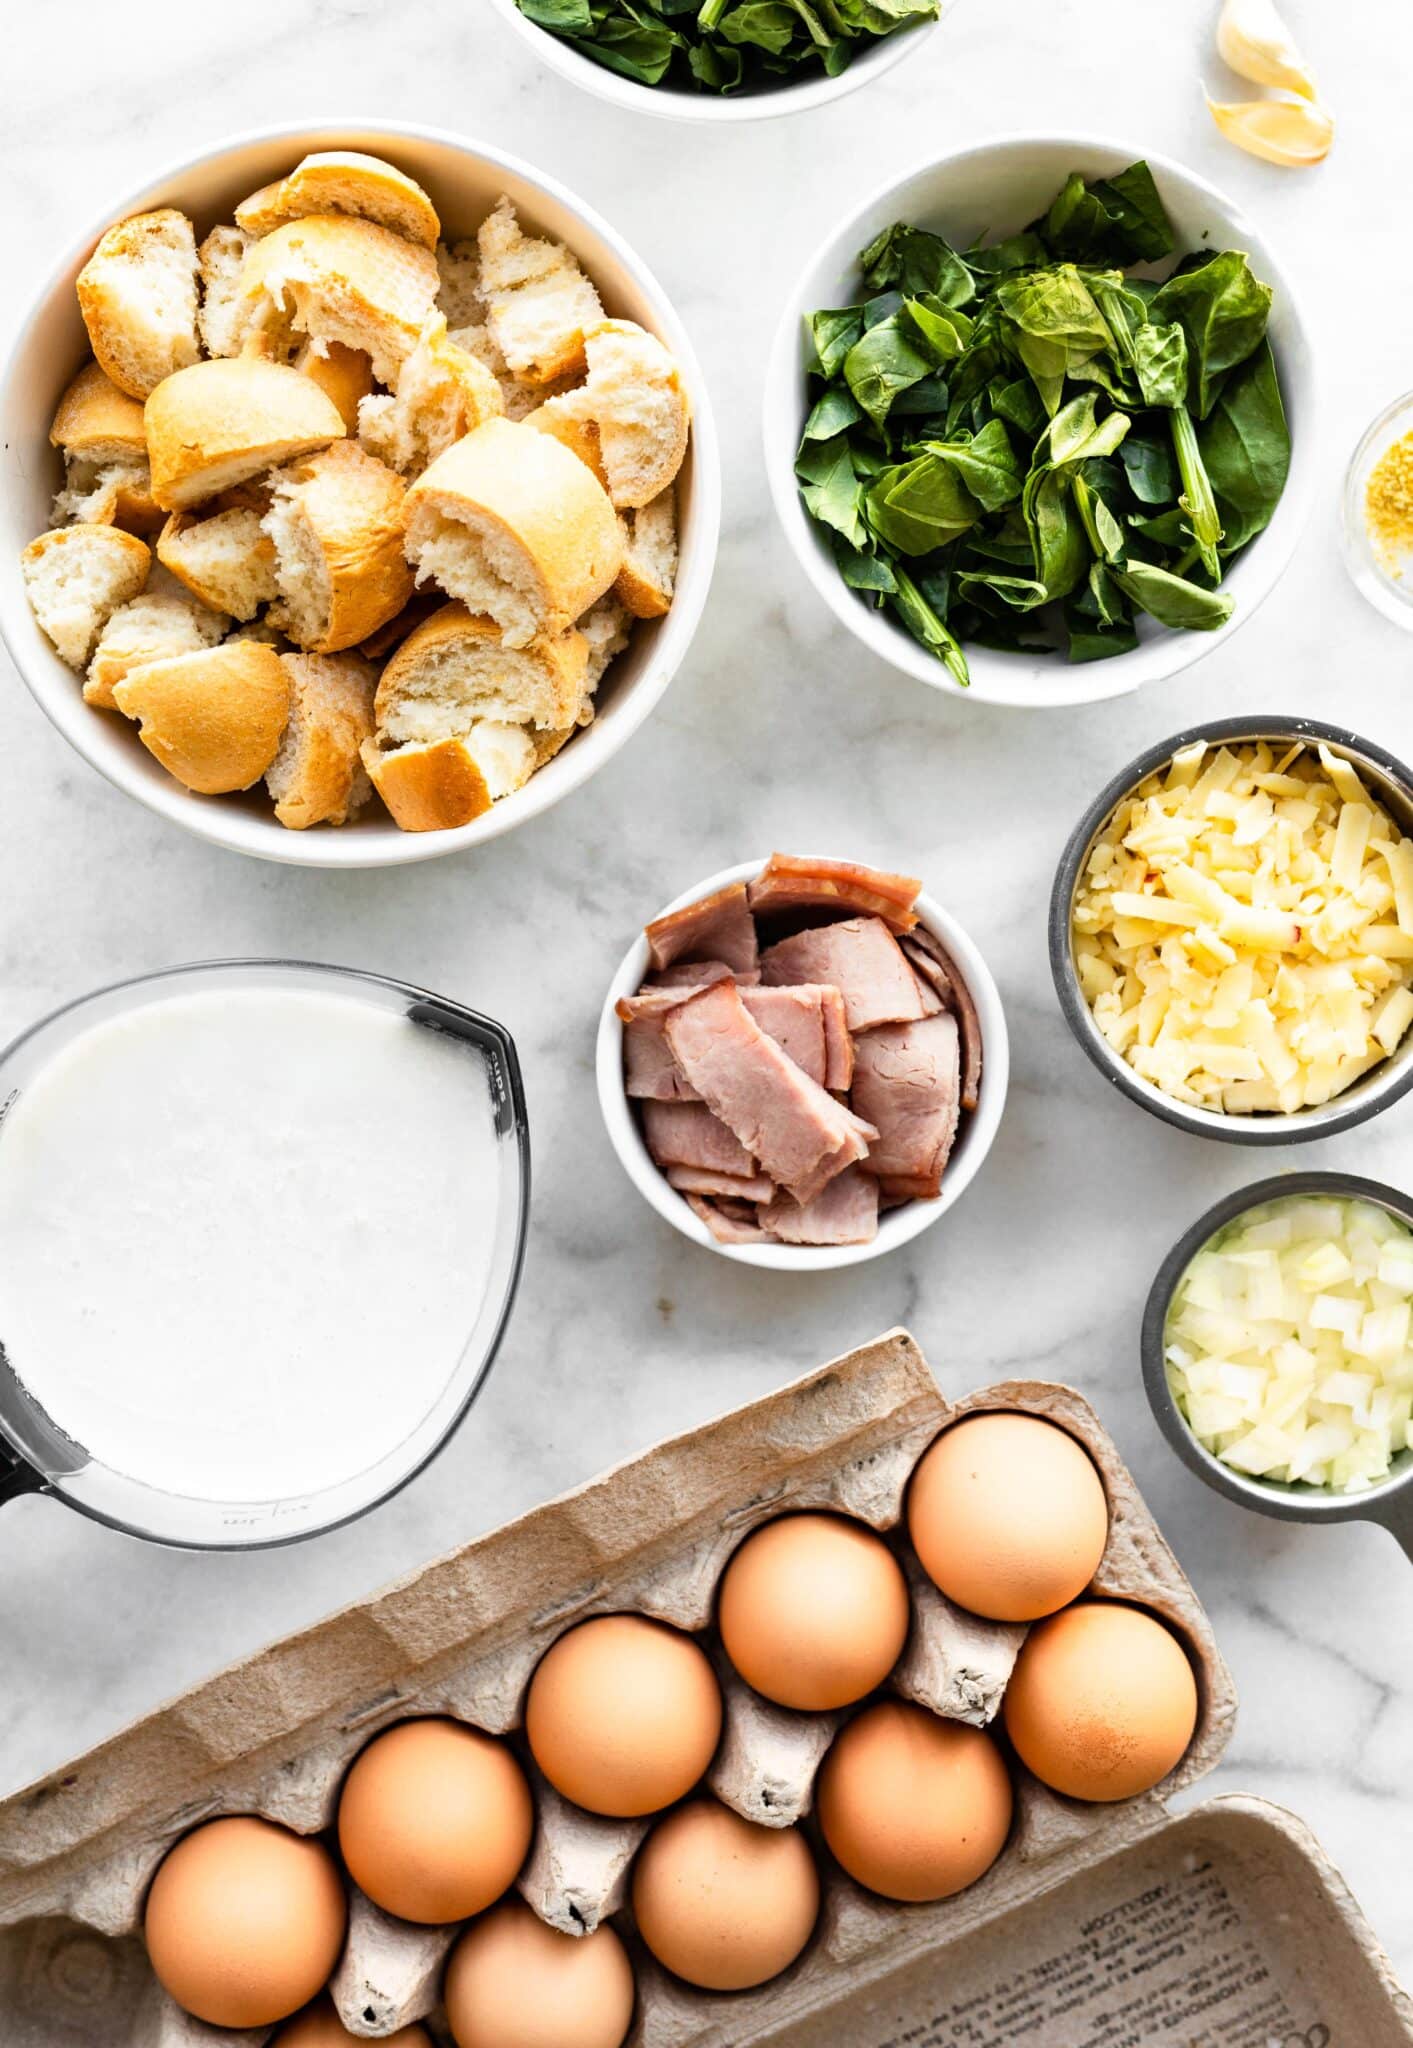 Overhead photo of eggs and bowls of gluten free bread, veggies, cheese and ham.